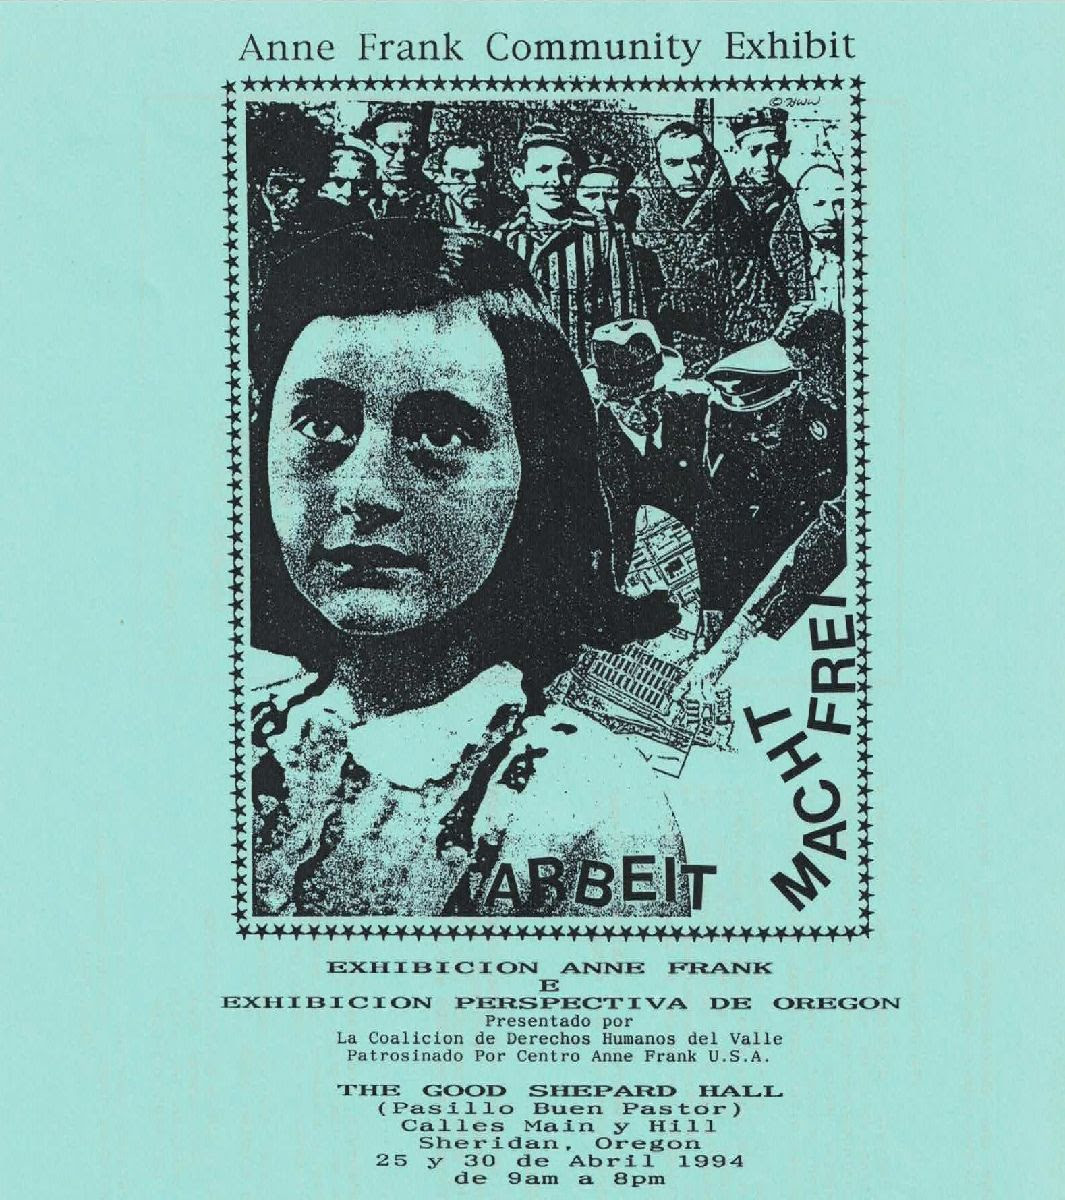 Spanish-language poster for Anne Frank exhibit in Sheridan, OR